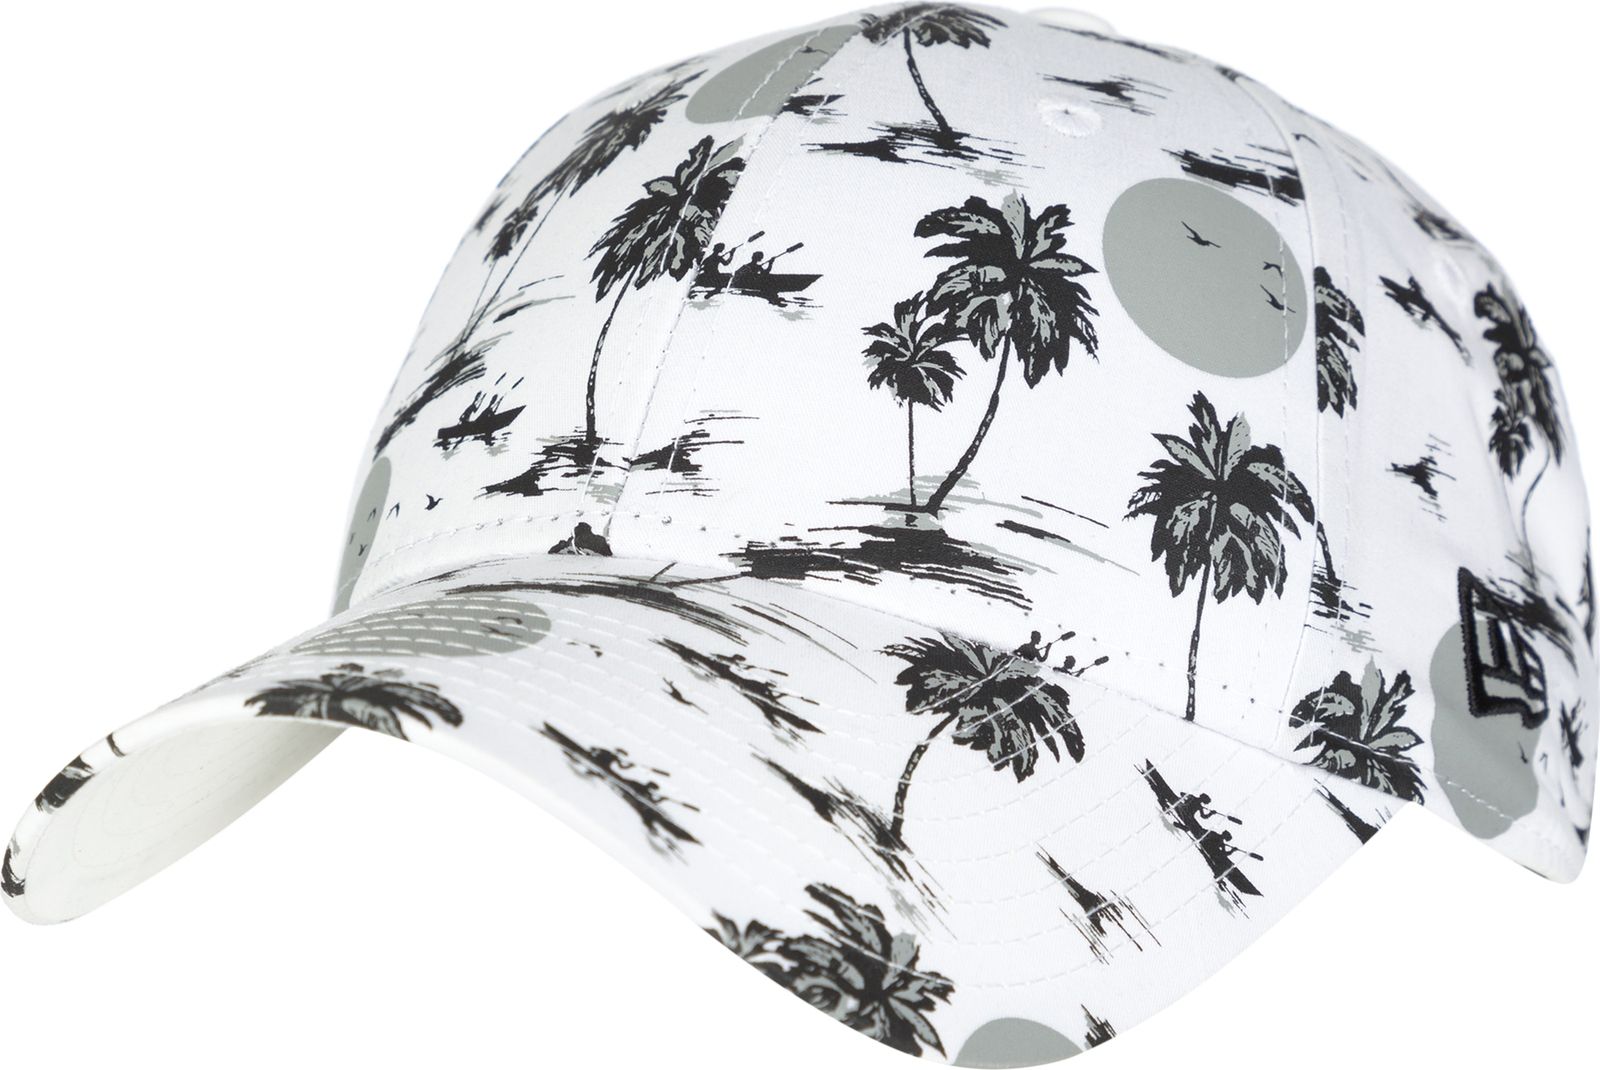   New Era 931 Youth Tropical Sun 9Forty Ne Whi, : . 11874943-WHIBLK.  54/55